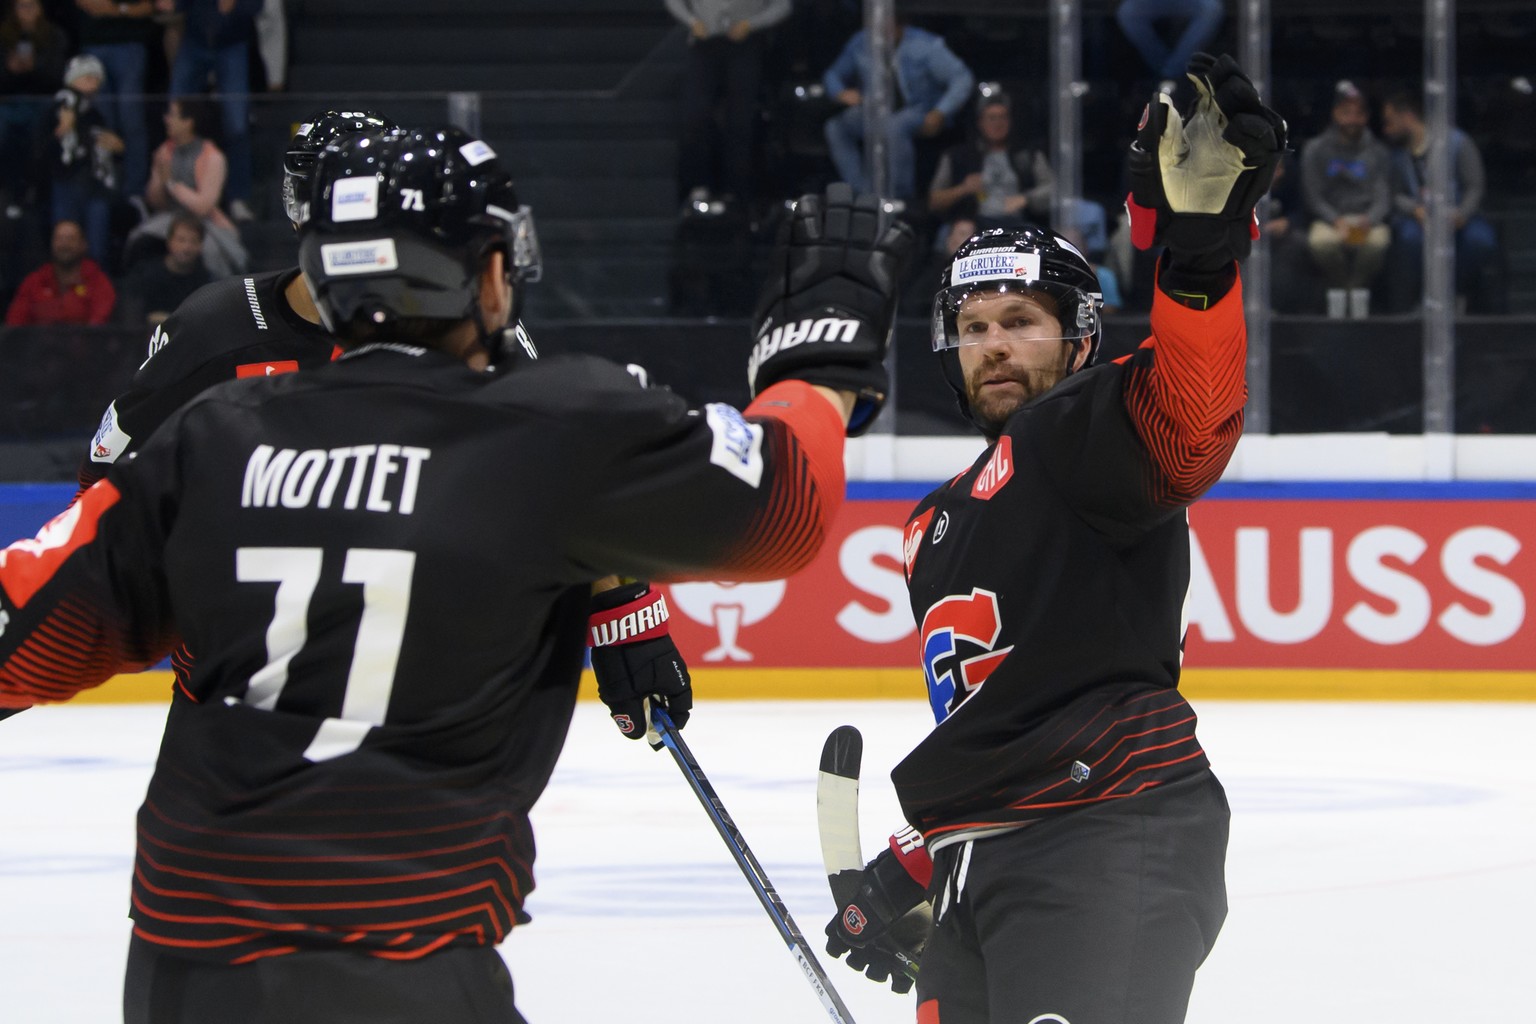 Fribourg's David Desharnais, right, celebrates his goal (4-1) with Fribourg's Killian Mottet, left, during the Champions Hockey League game day 2 between Switzerland's HC Fribourg-Gotteron and Slovaki ...